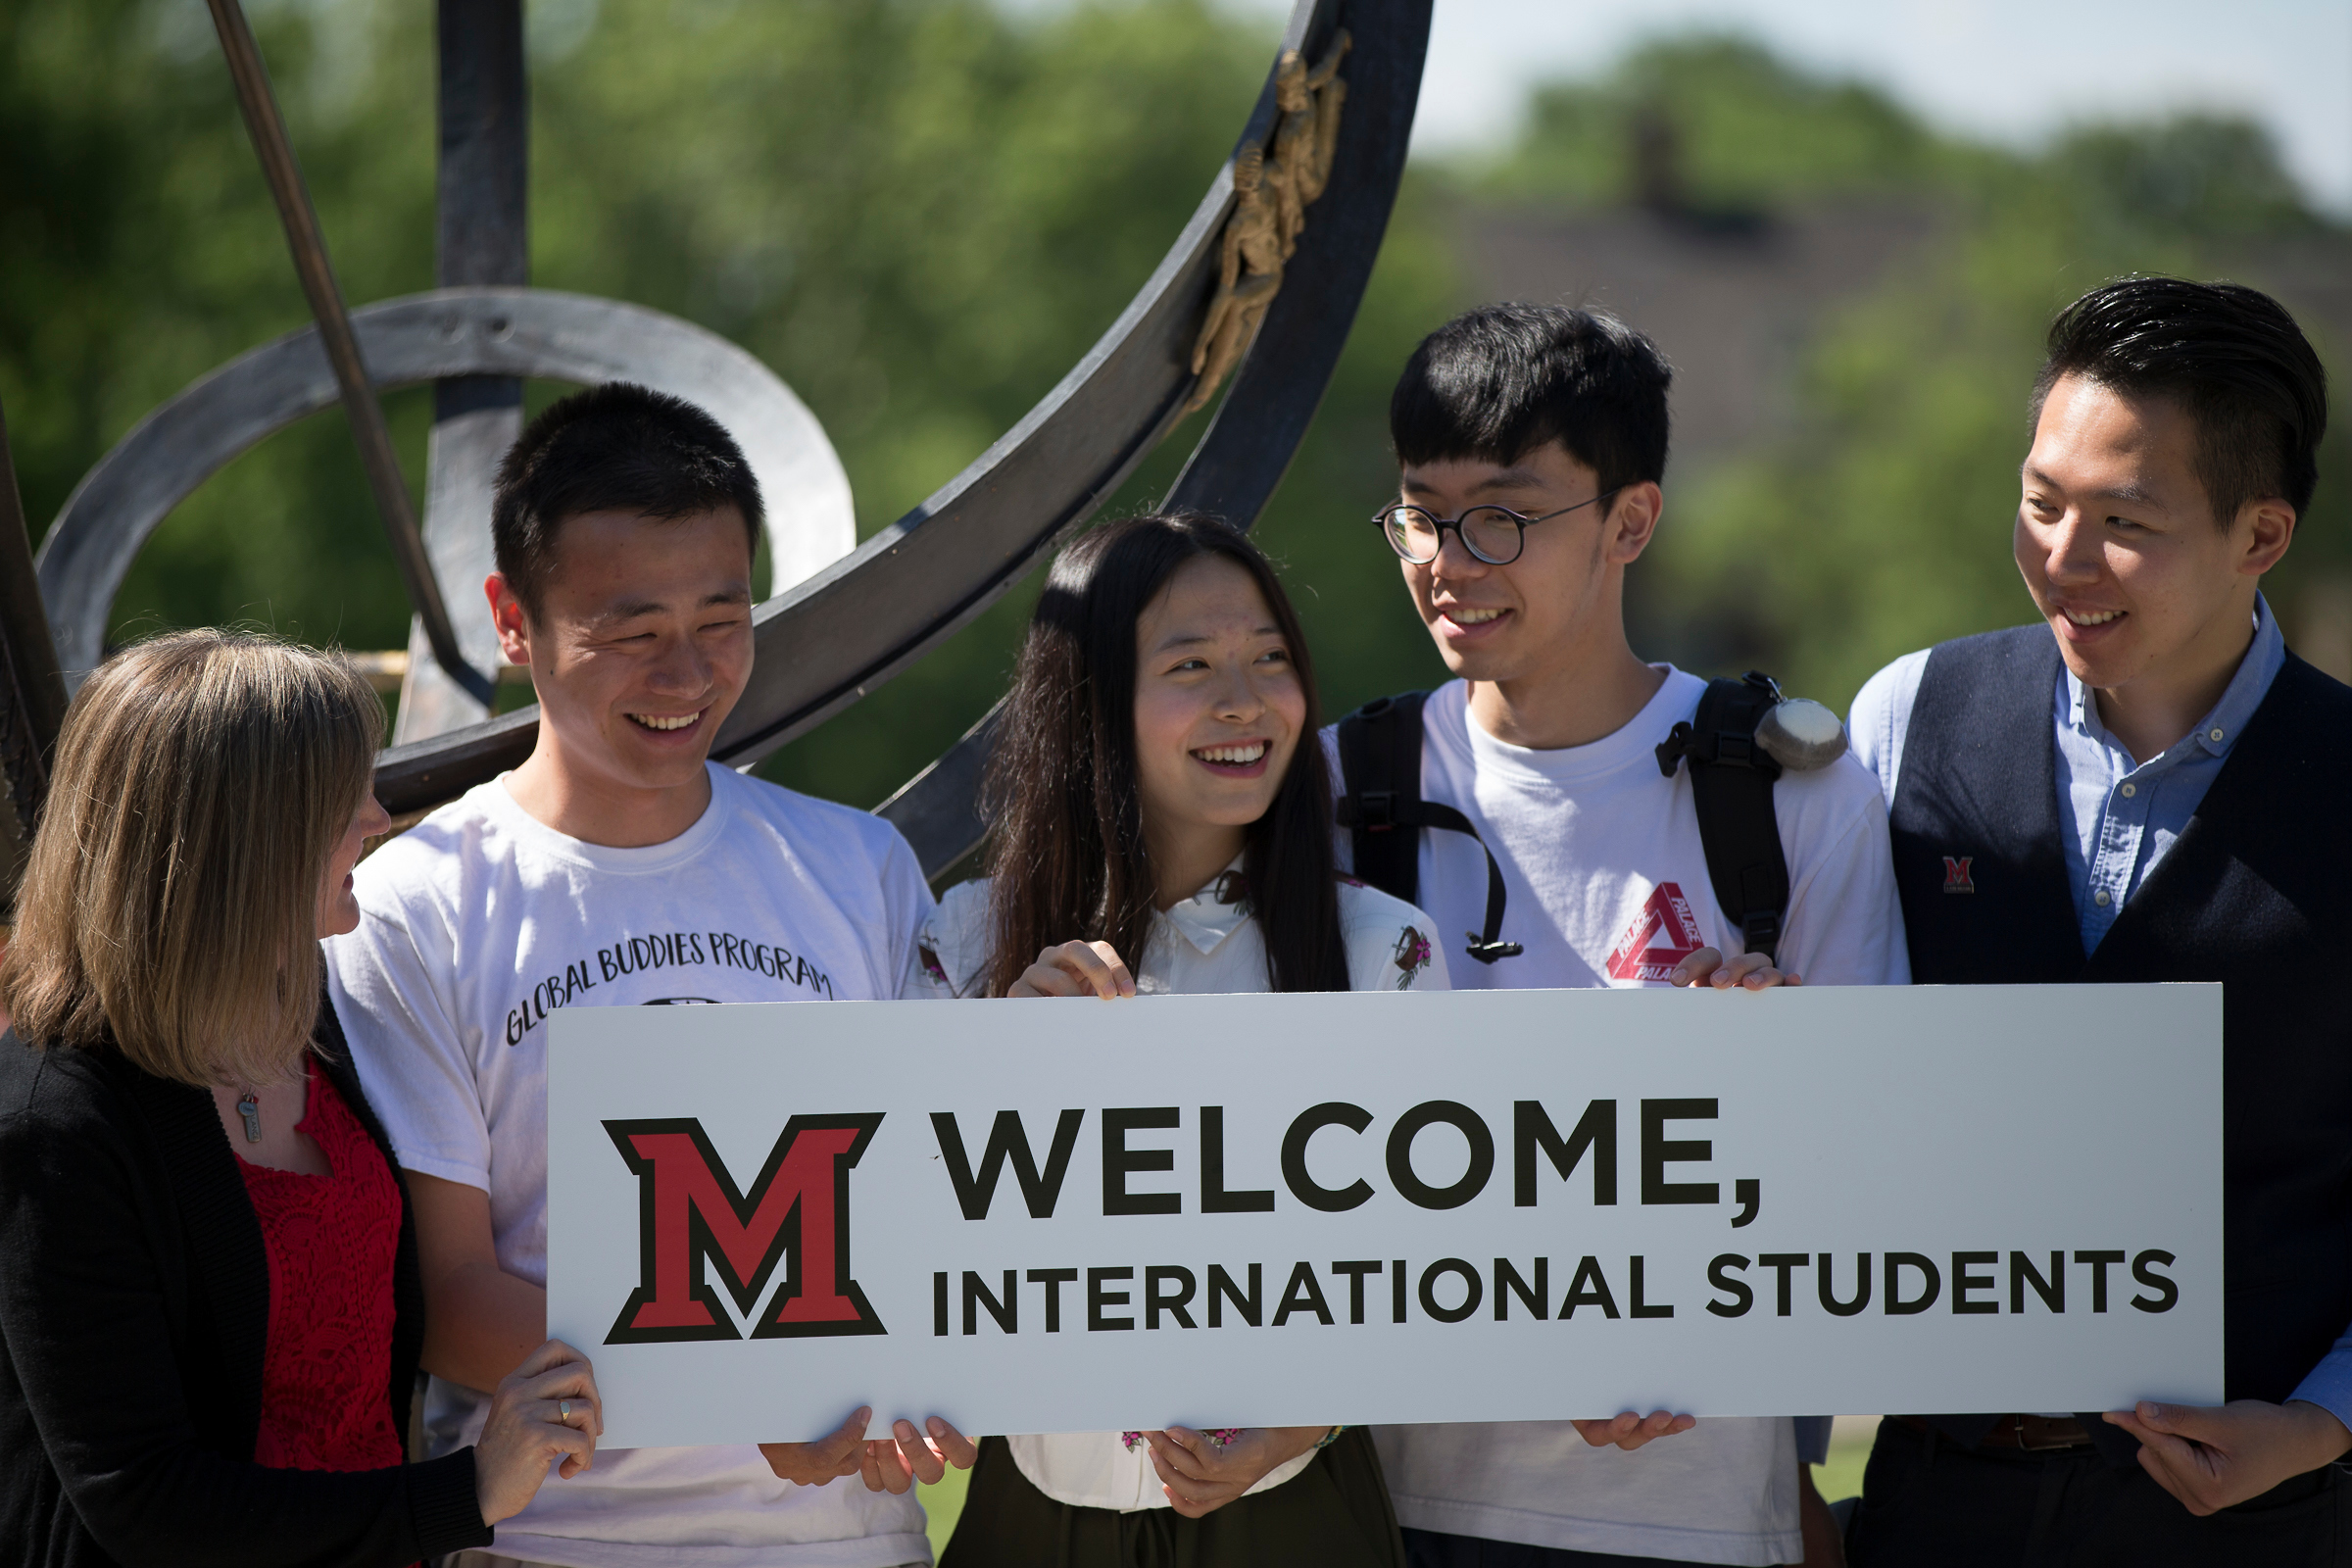 Miami University students and staff holding Welcome, International Students sign